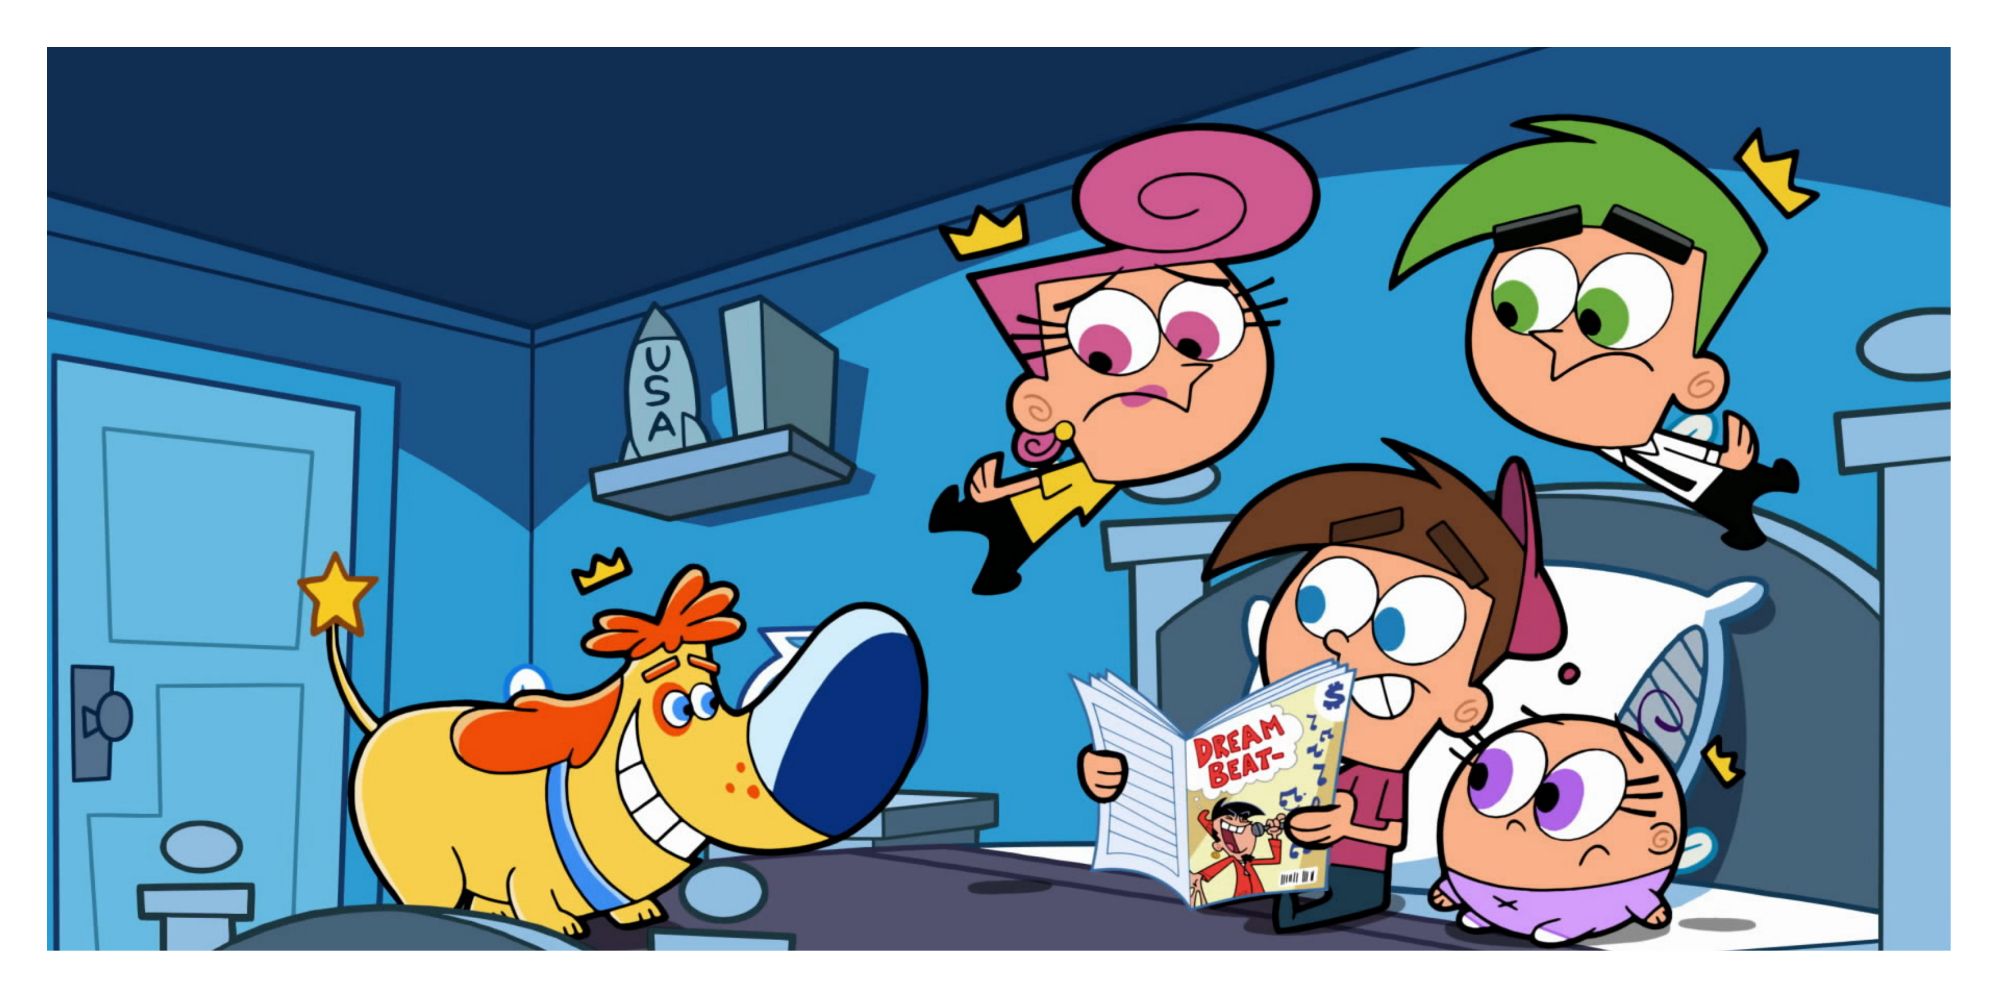 Timmy, Poof, Cosmo, Wanda, and Sparky in Fairly Odd Parents.